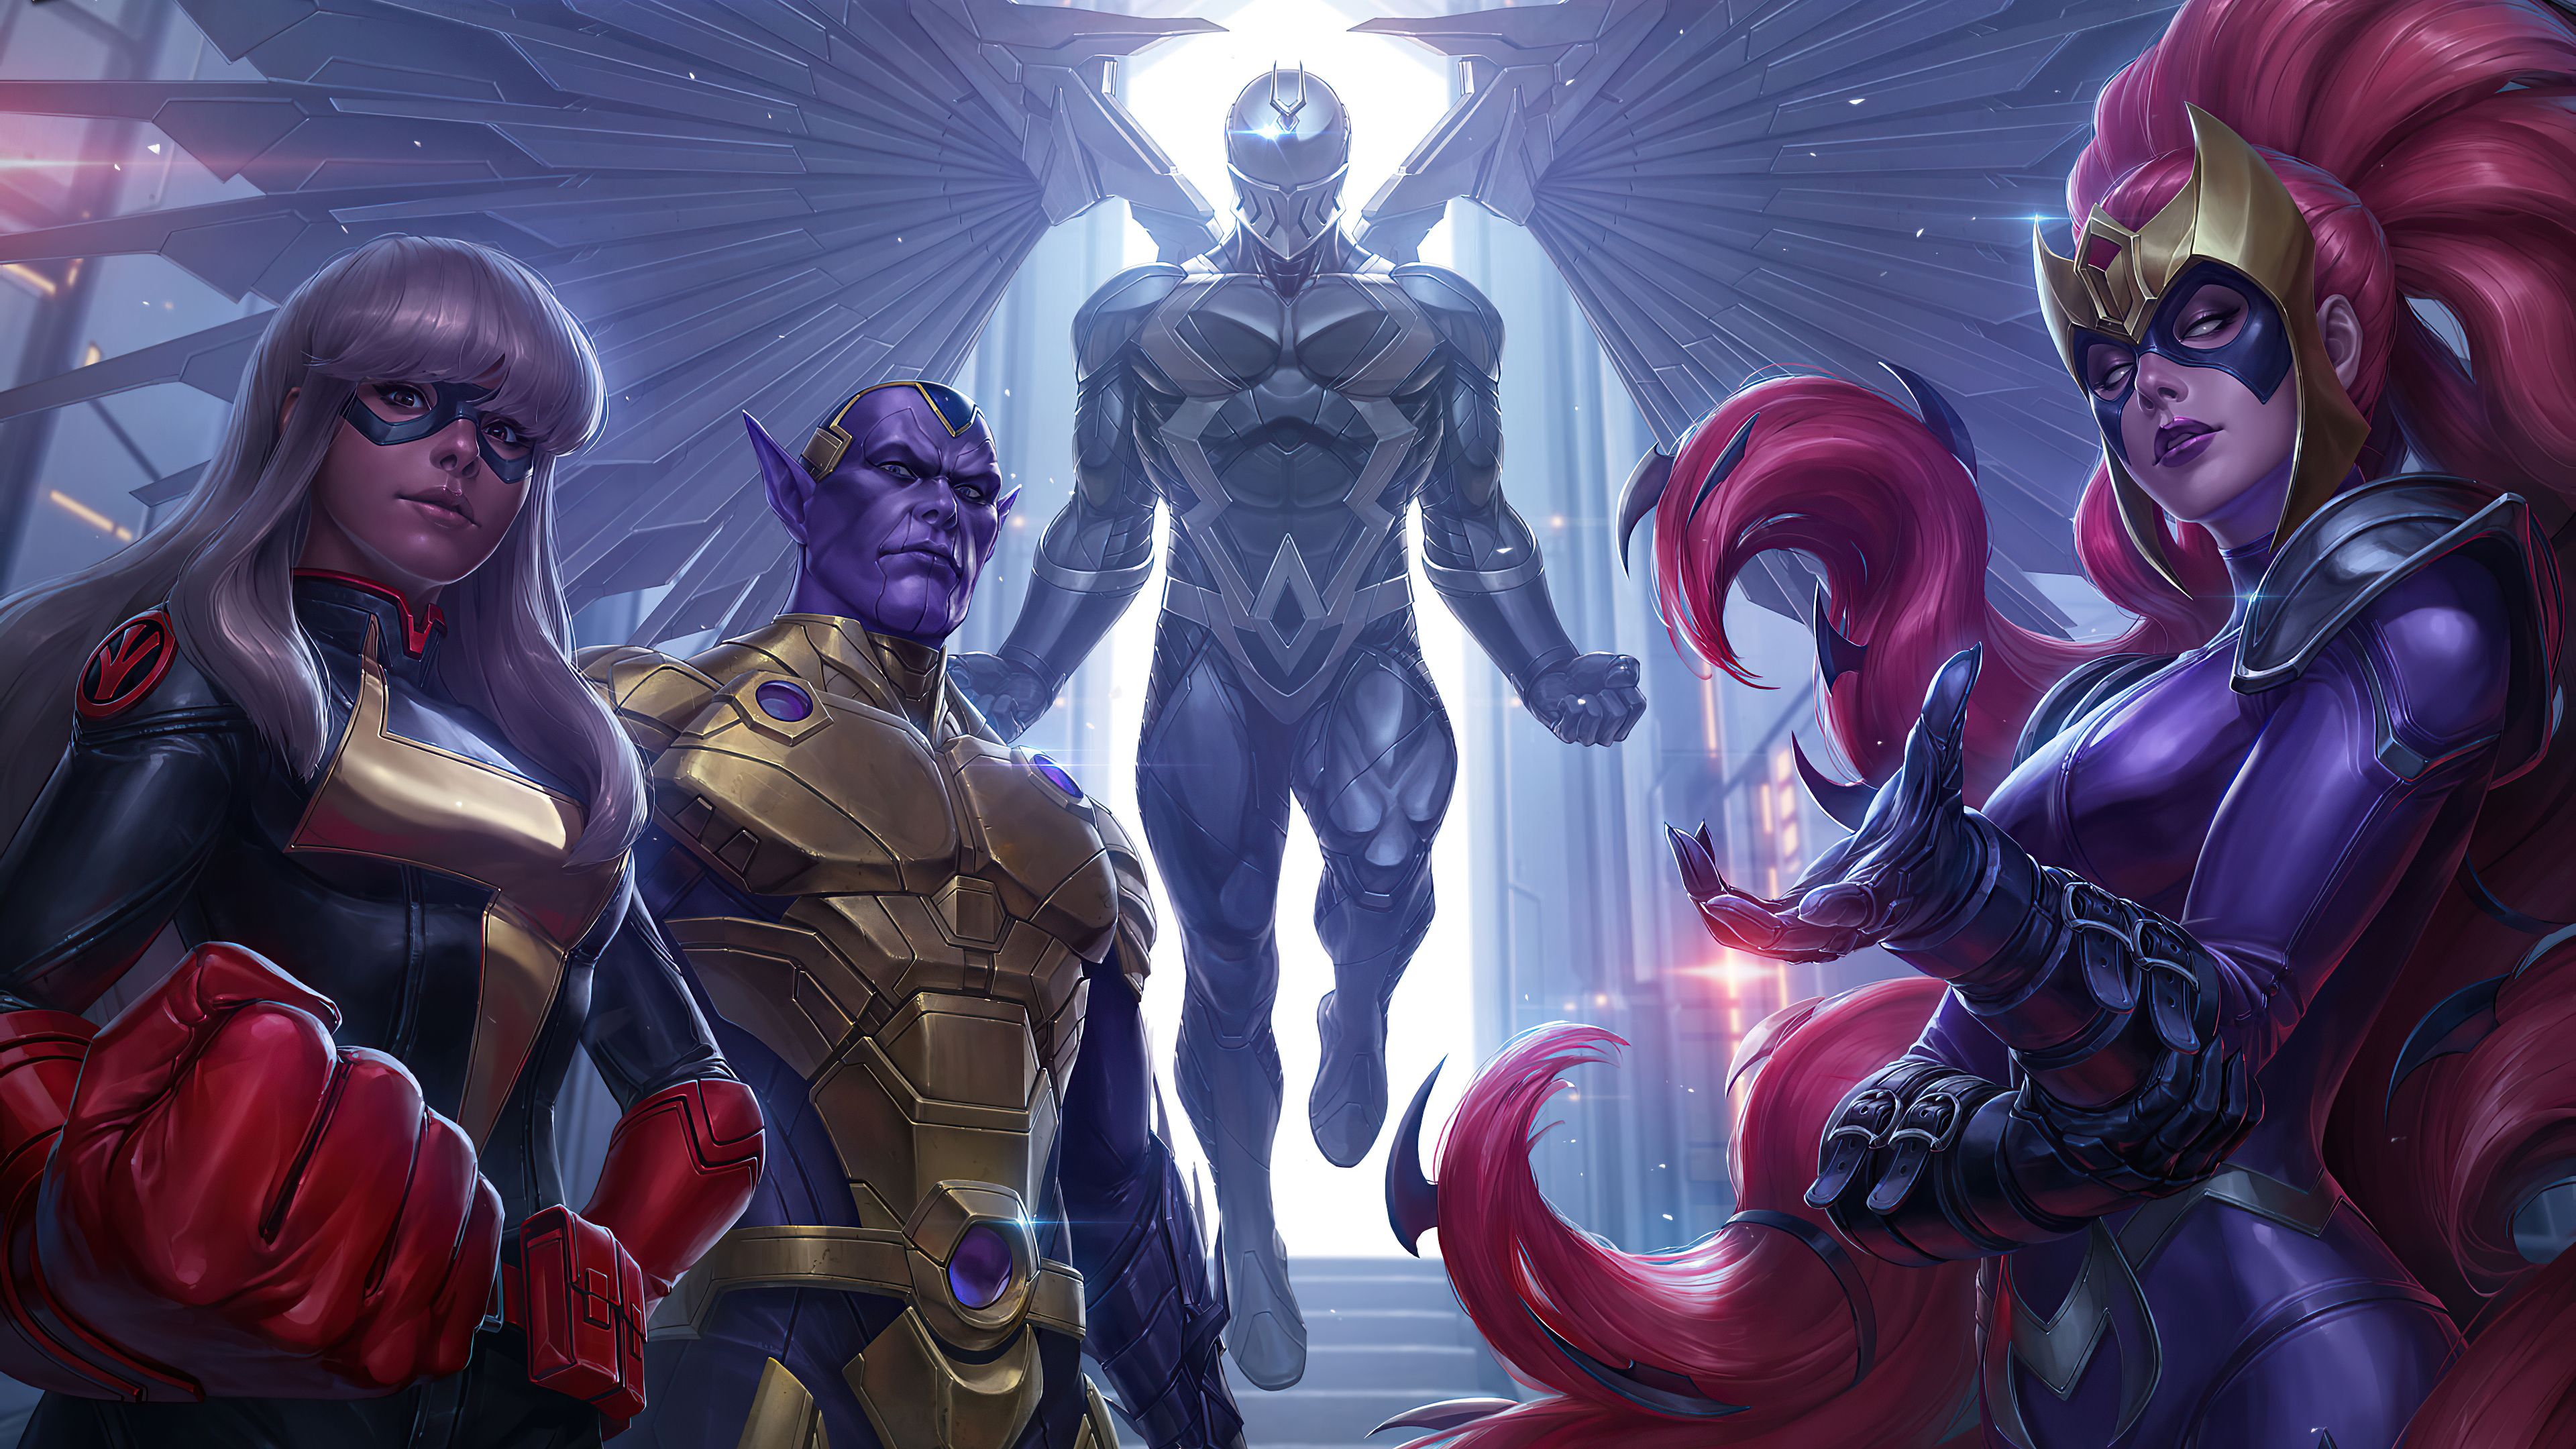 4K Marvel Future Fight 2020 Wallpaper, HD Games 4K Wallpaper, Image, Photo and Background